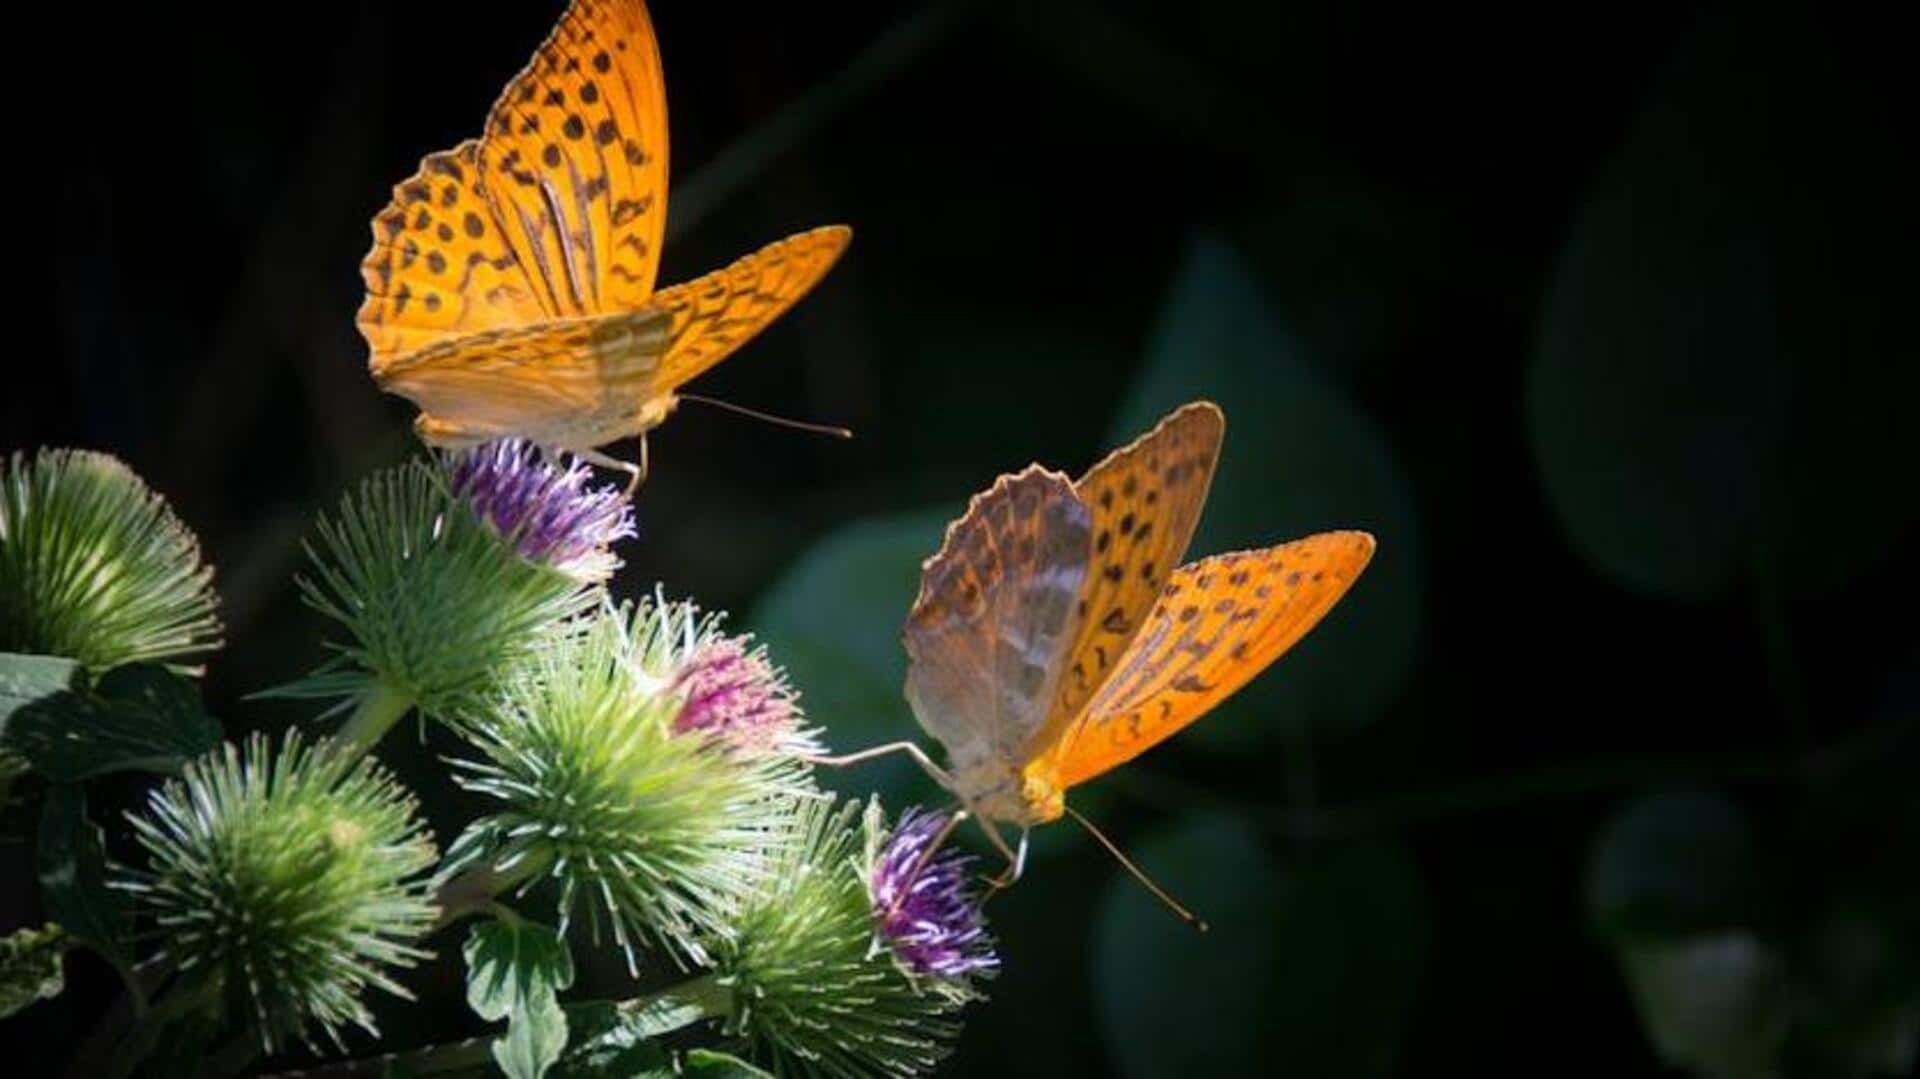 Witness the butterfly spectacle in Mexico City